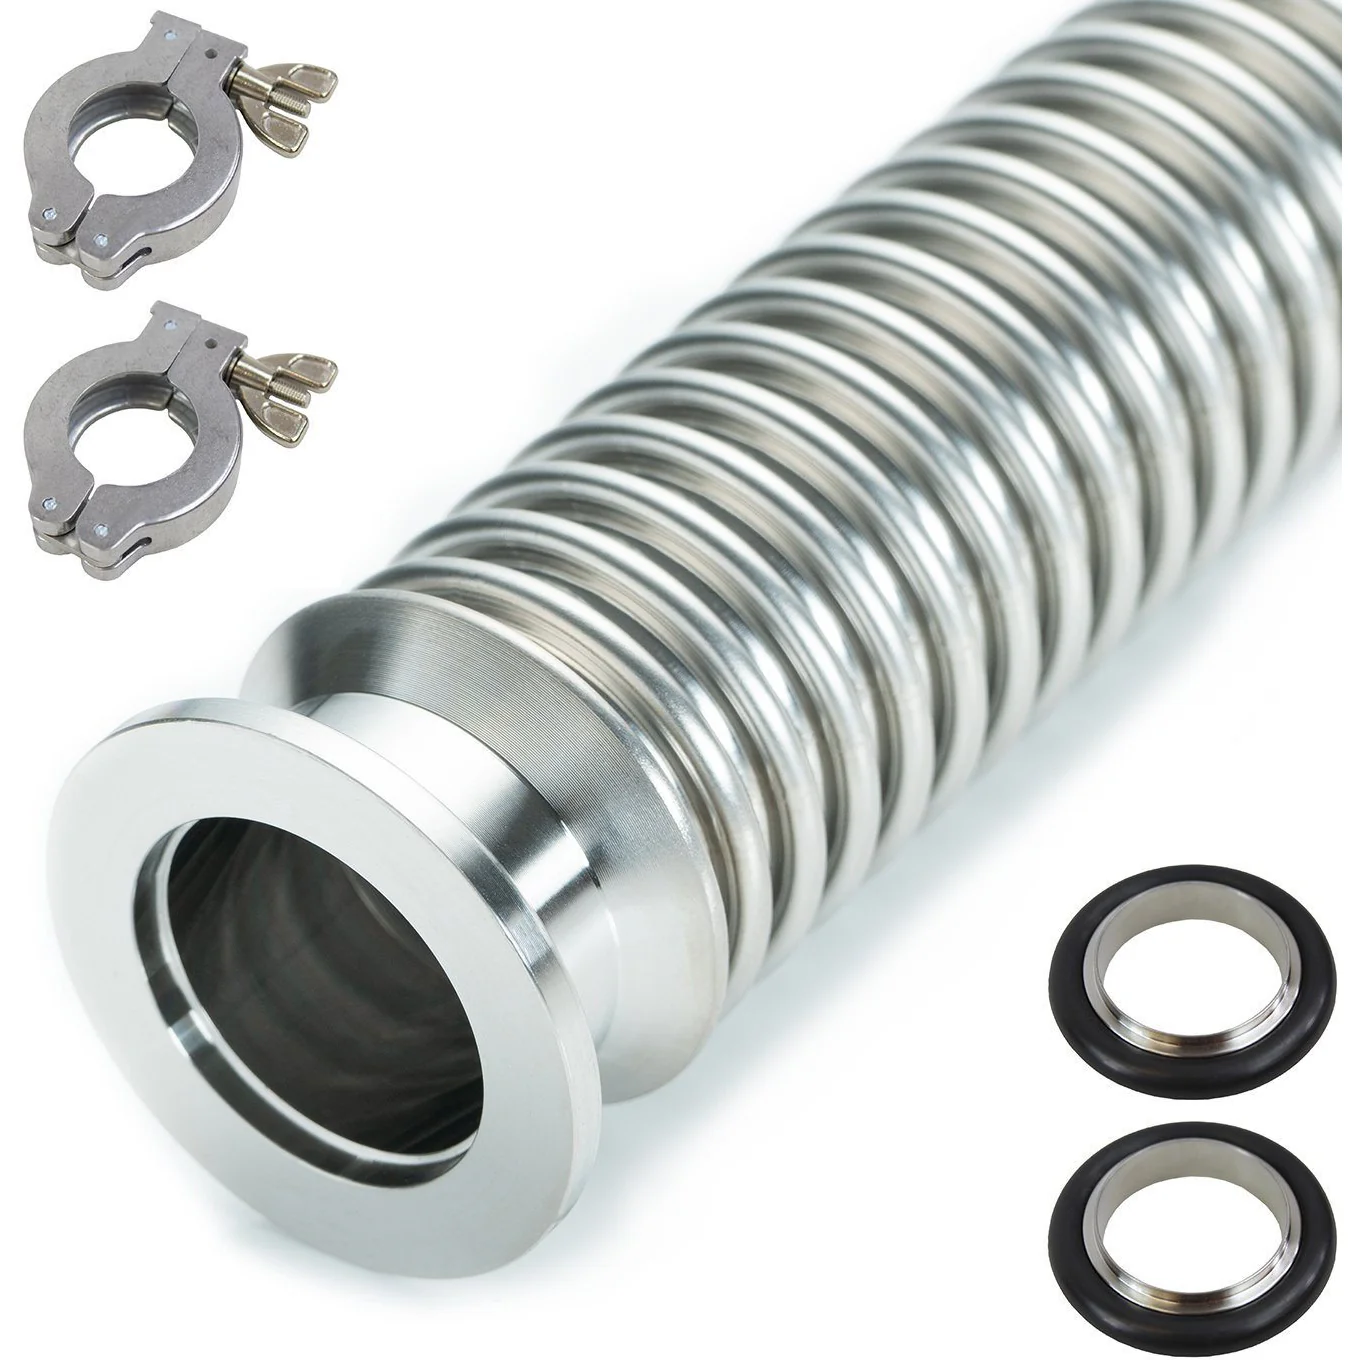 KF-25 Bellow Fitting Hose - KIT Questions & Answers